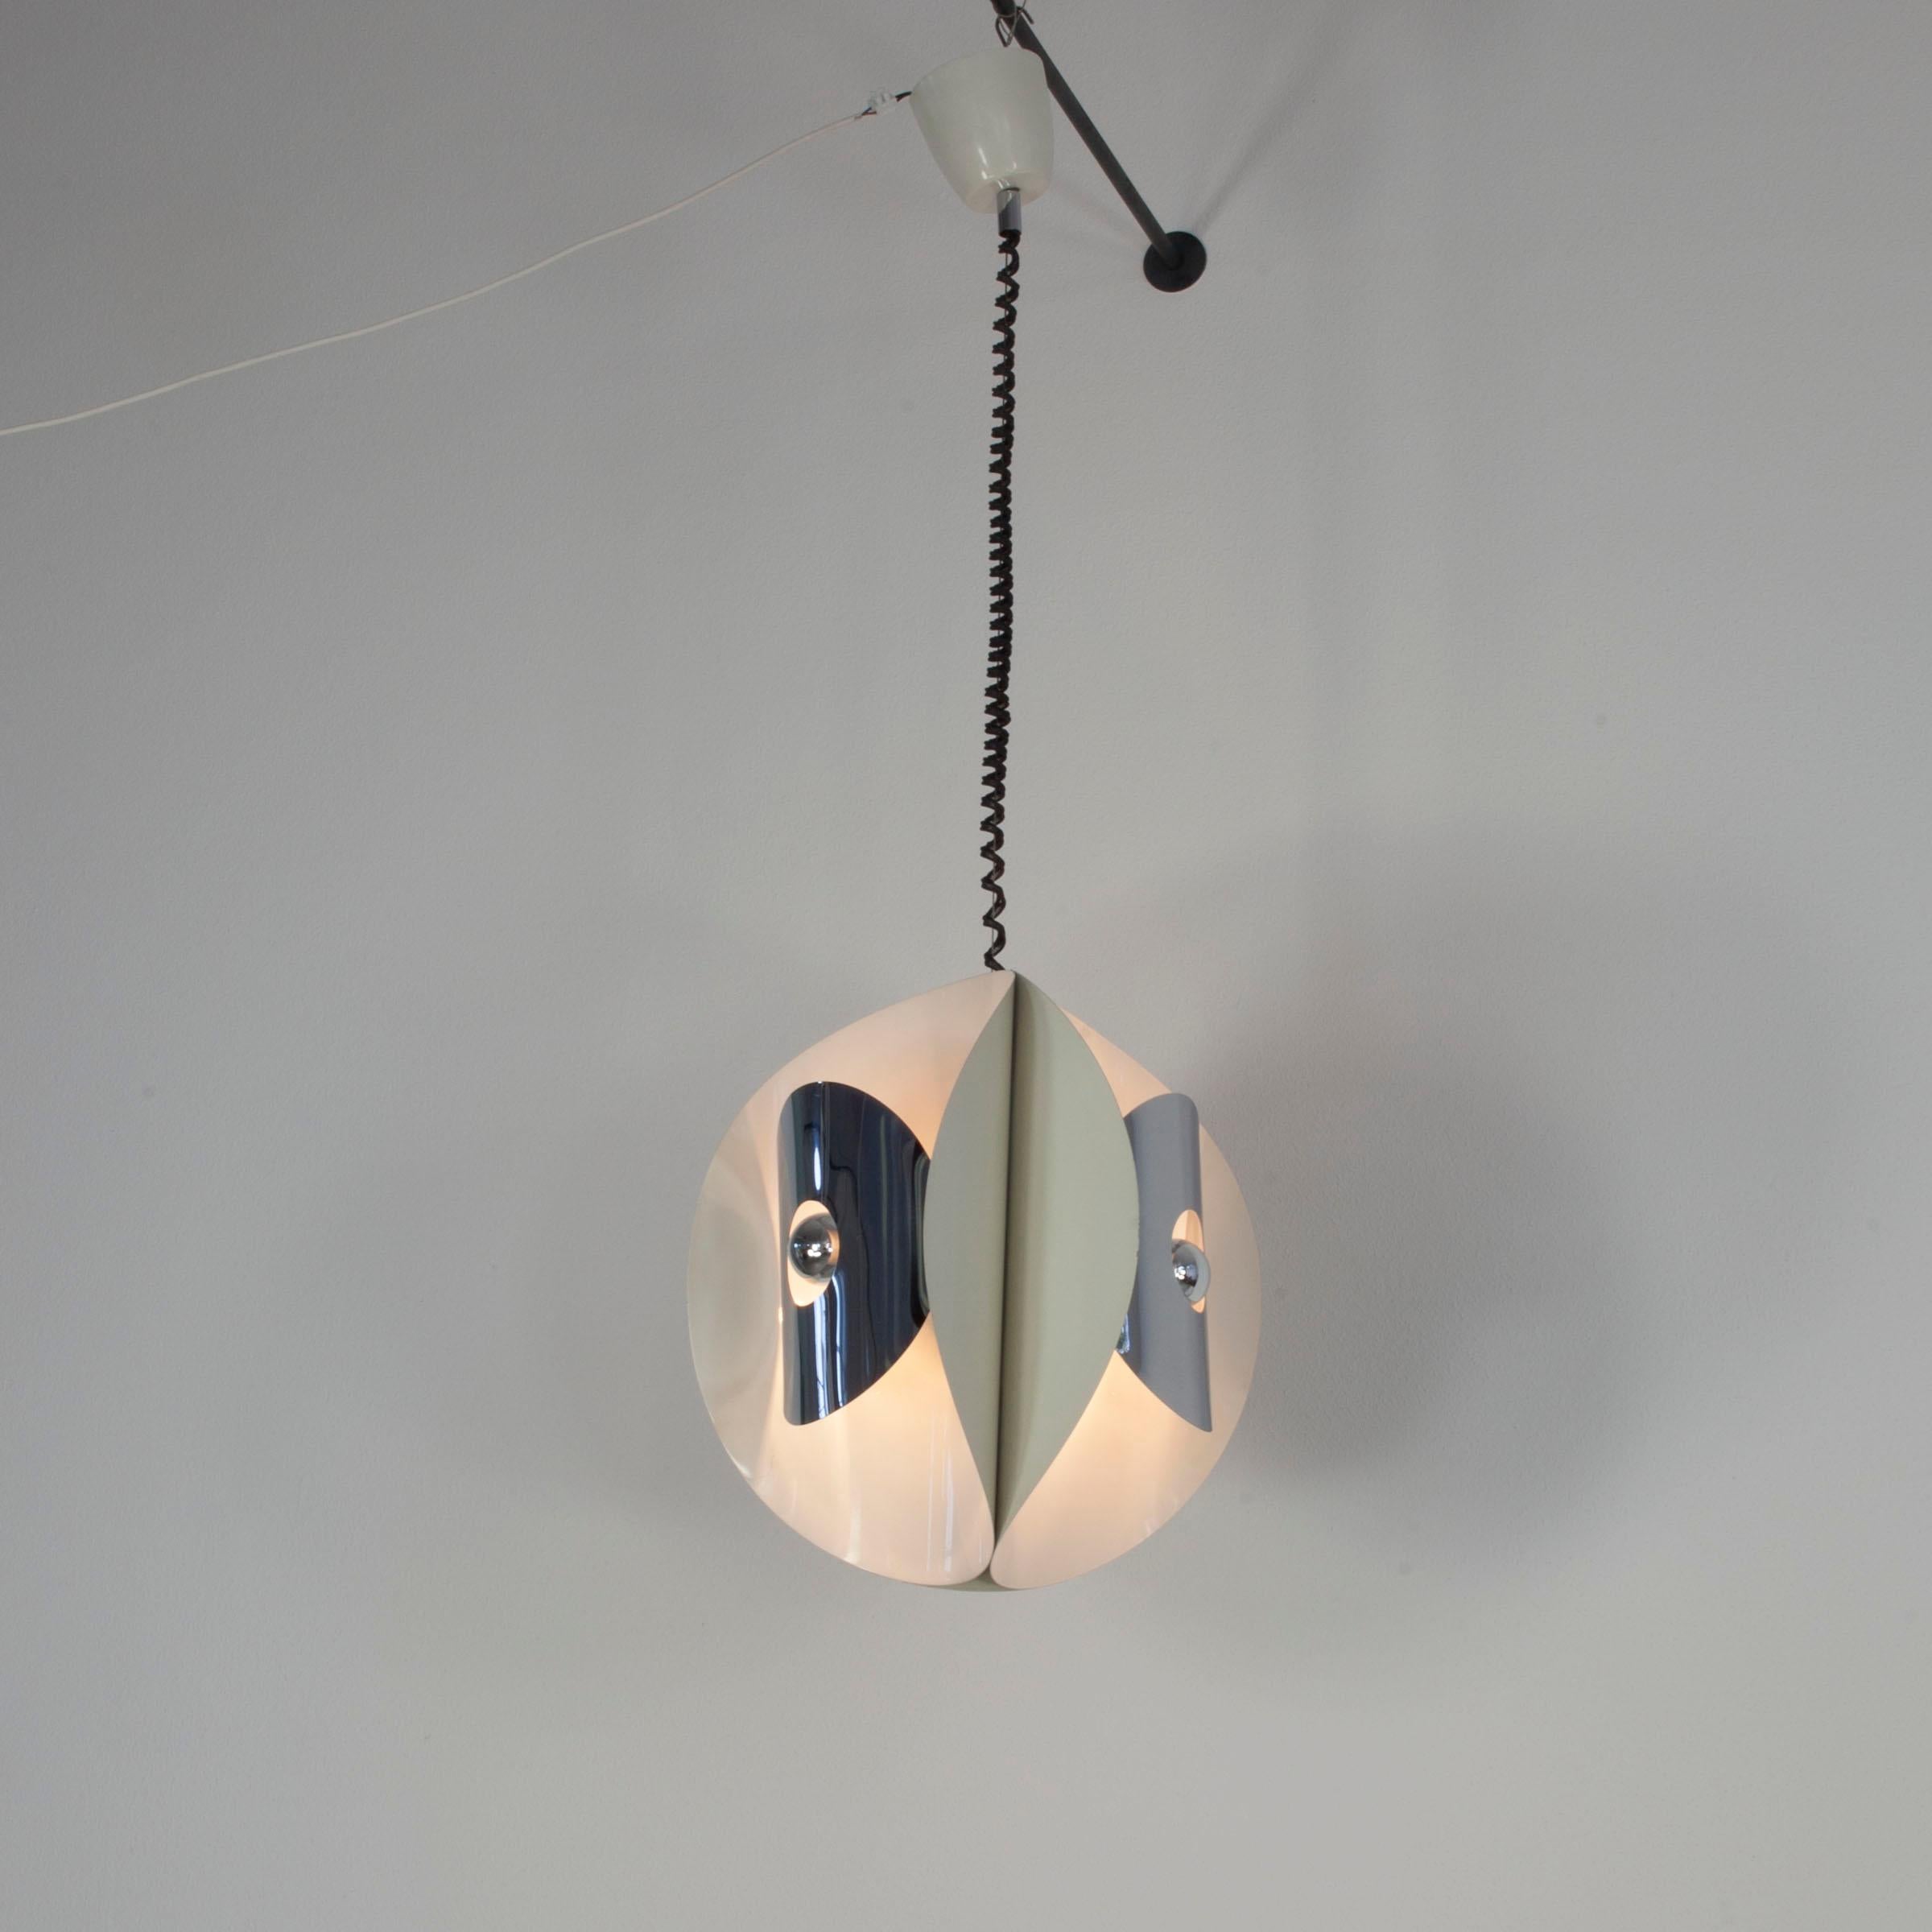 Mid-Century Modern Pendantlamp with white painted metal & chrome shades, Gioffredo Reggiani, 1970s For Sale